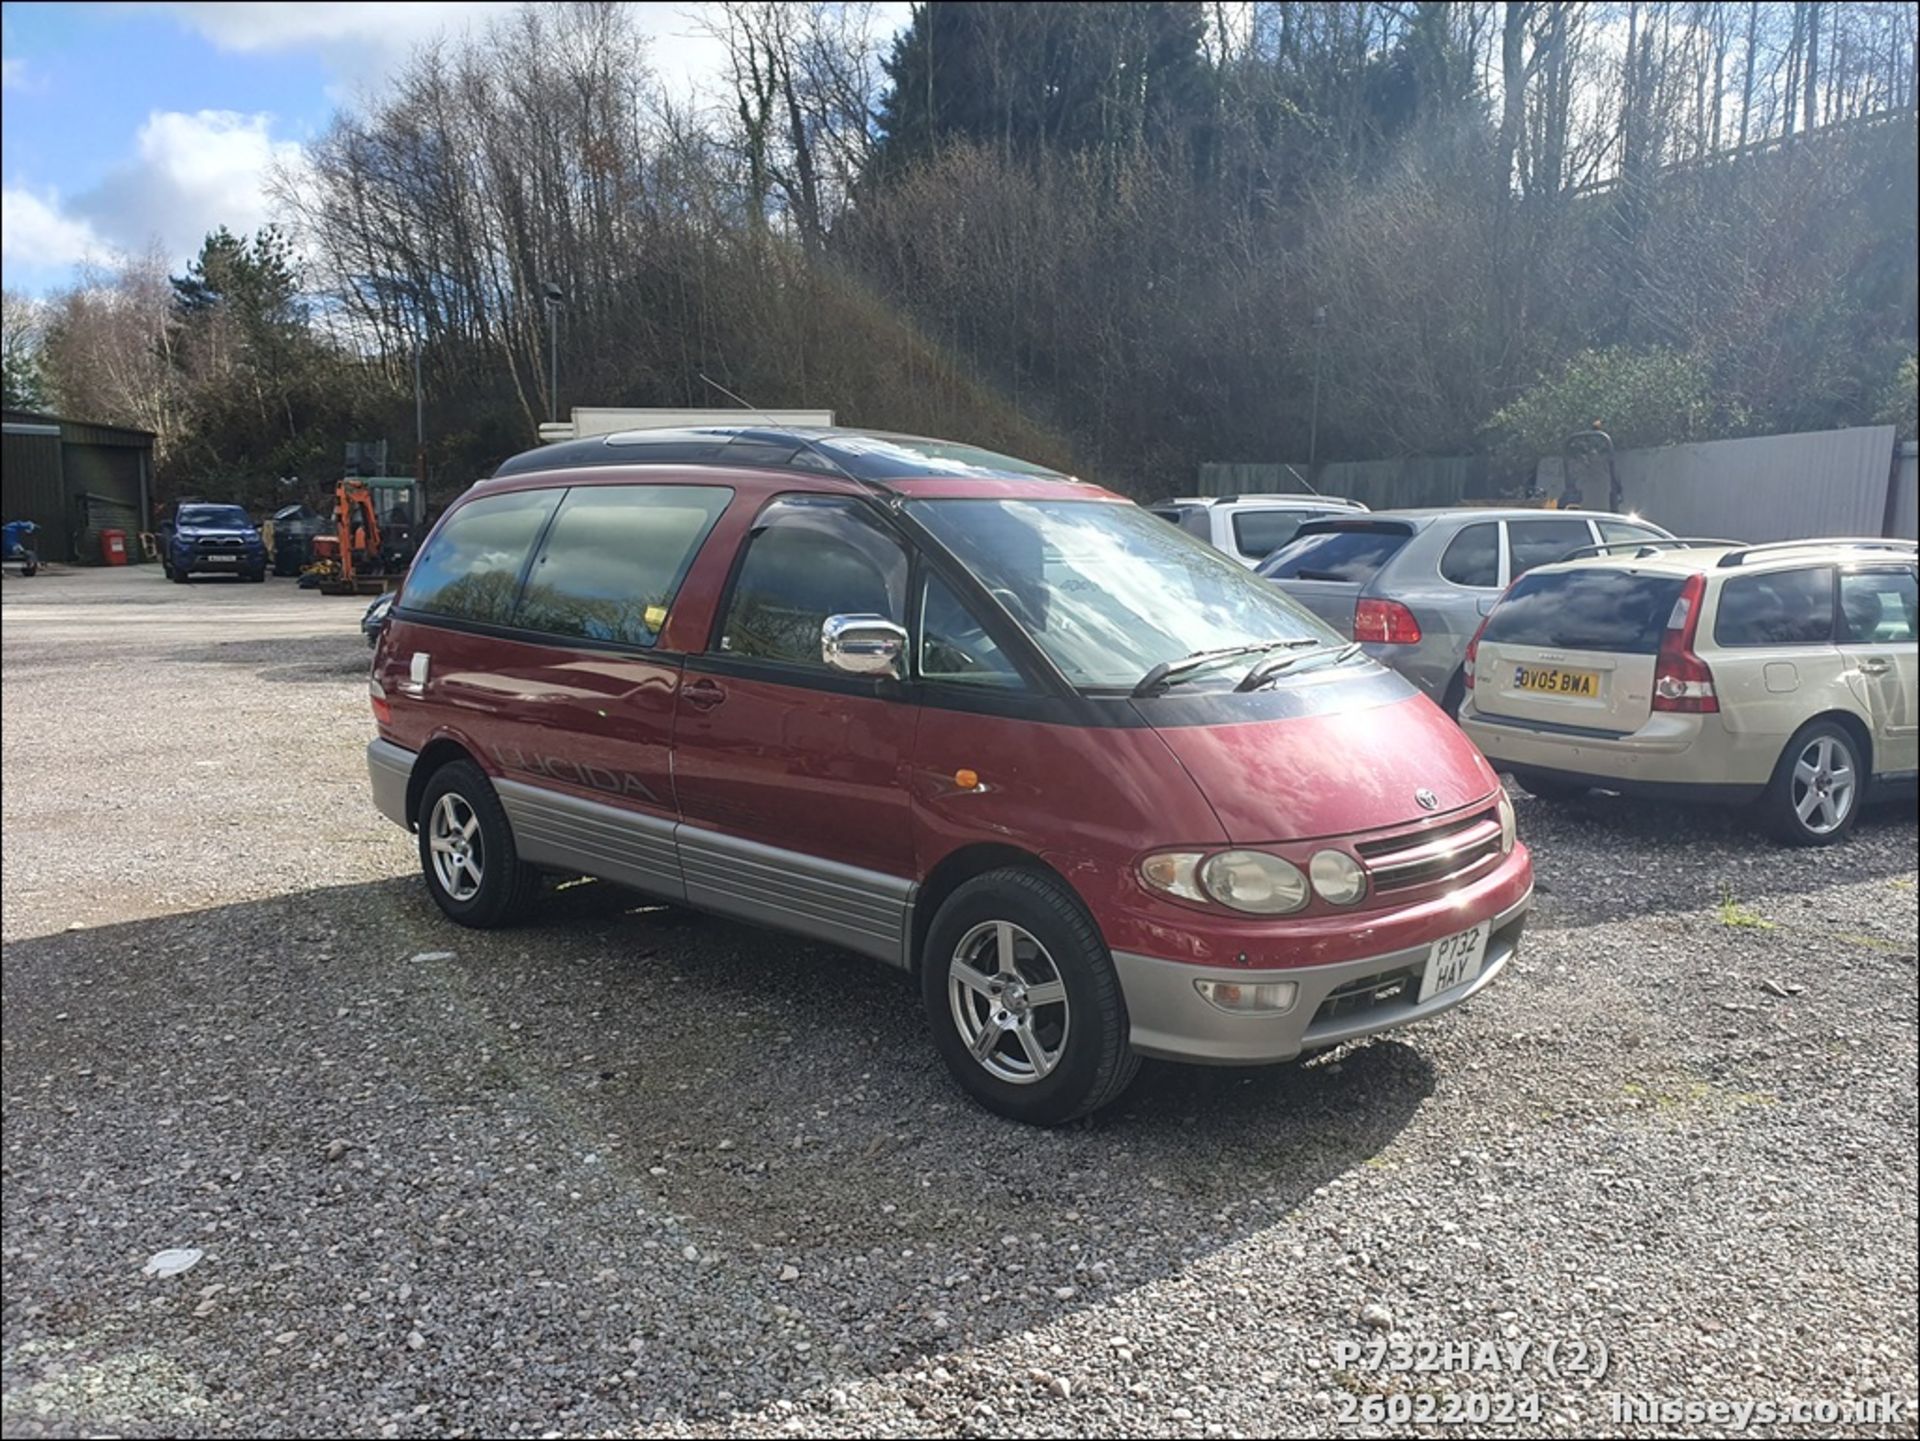 1997 TOYOTA LUCIDA - 2184cc 4dr Van (Red) - Image 3 of 22